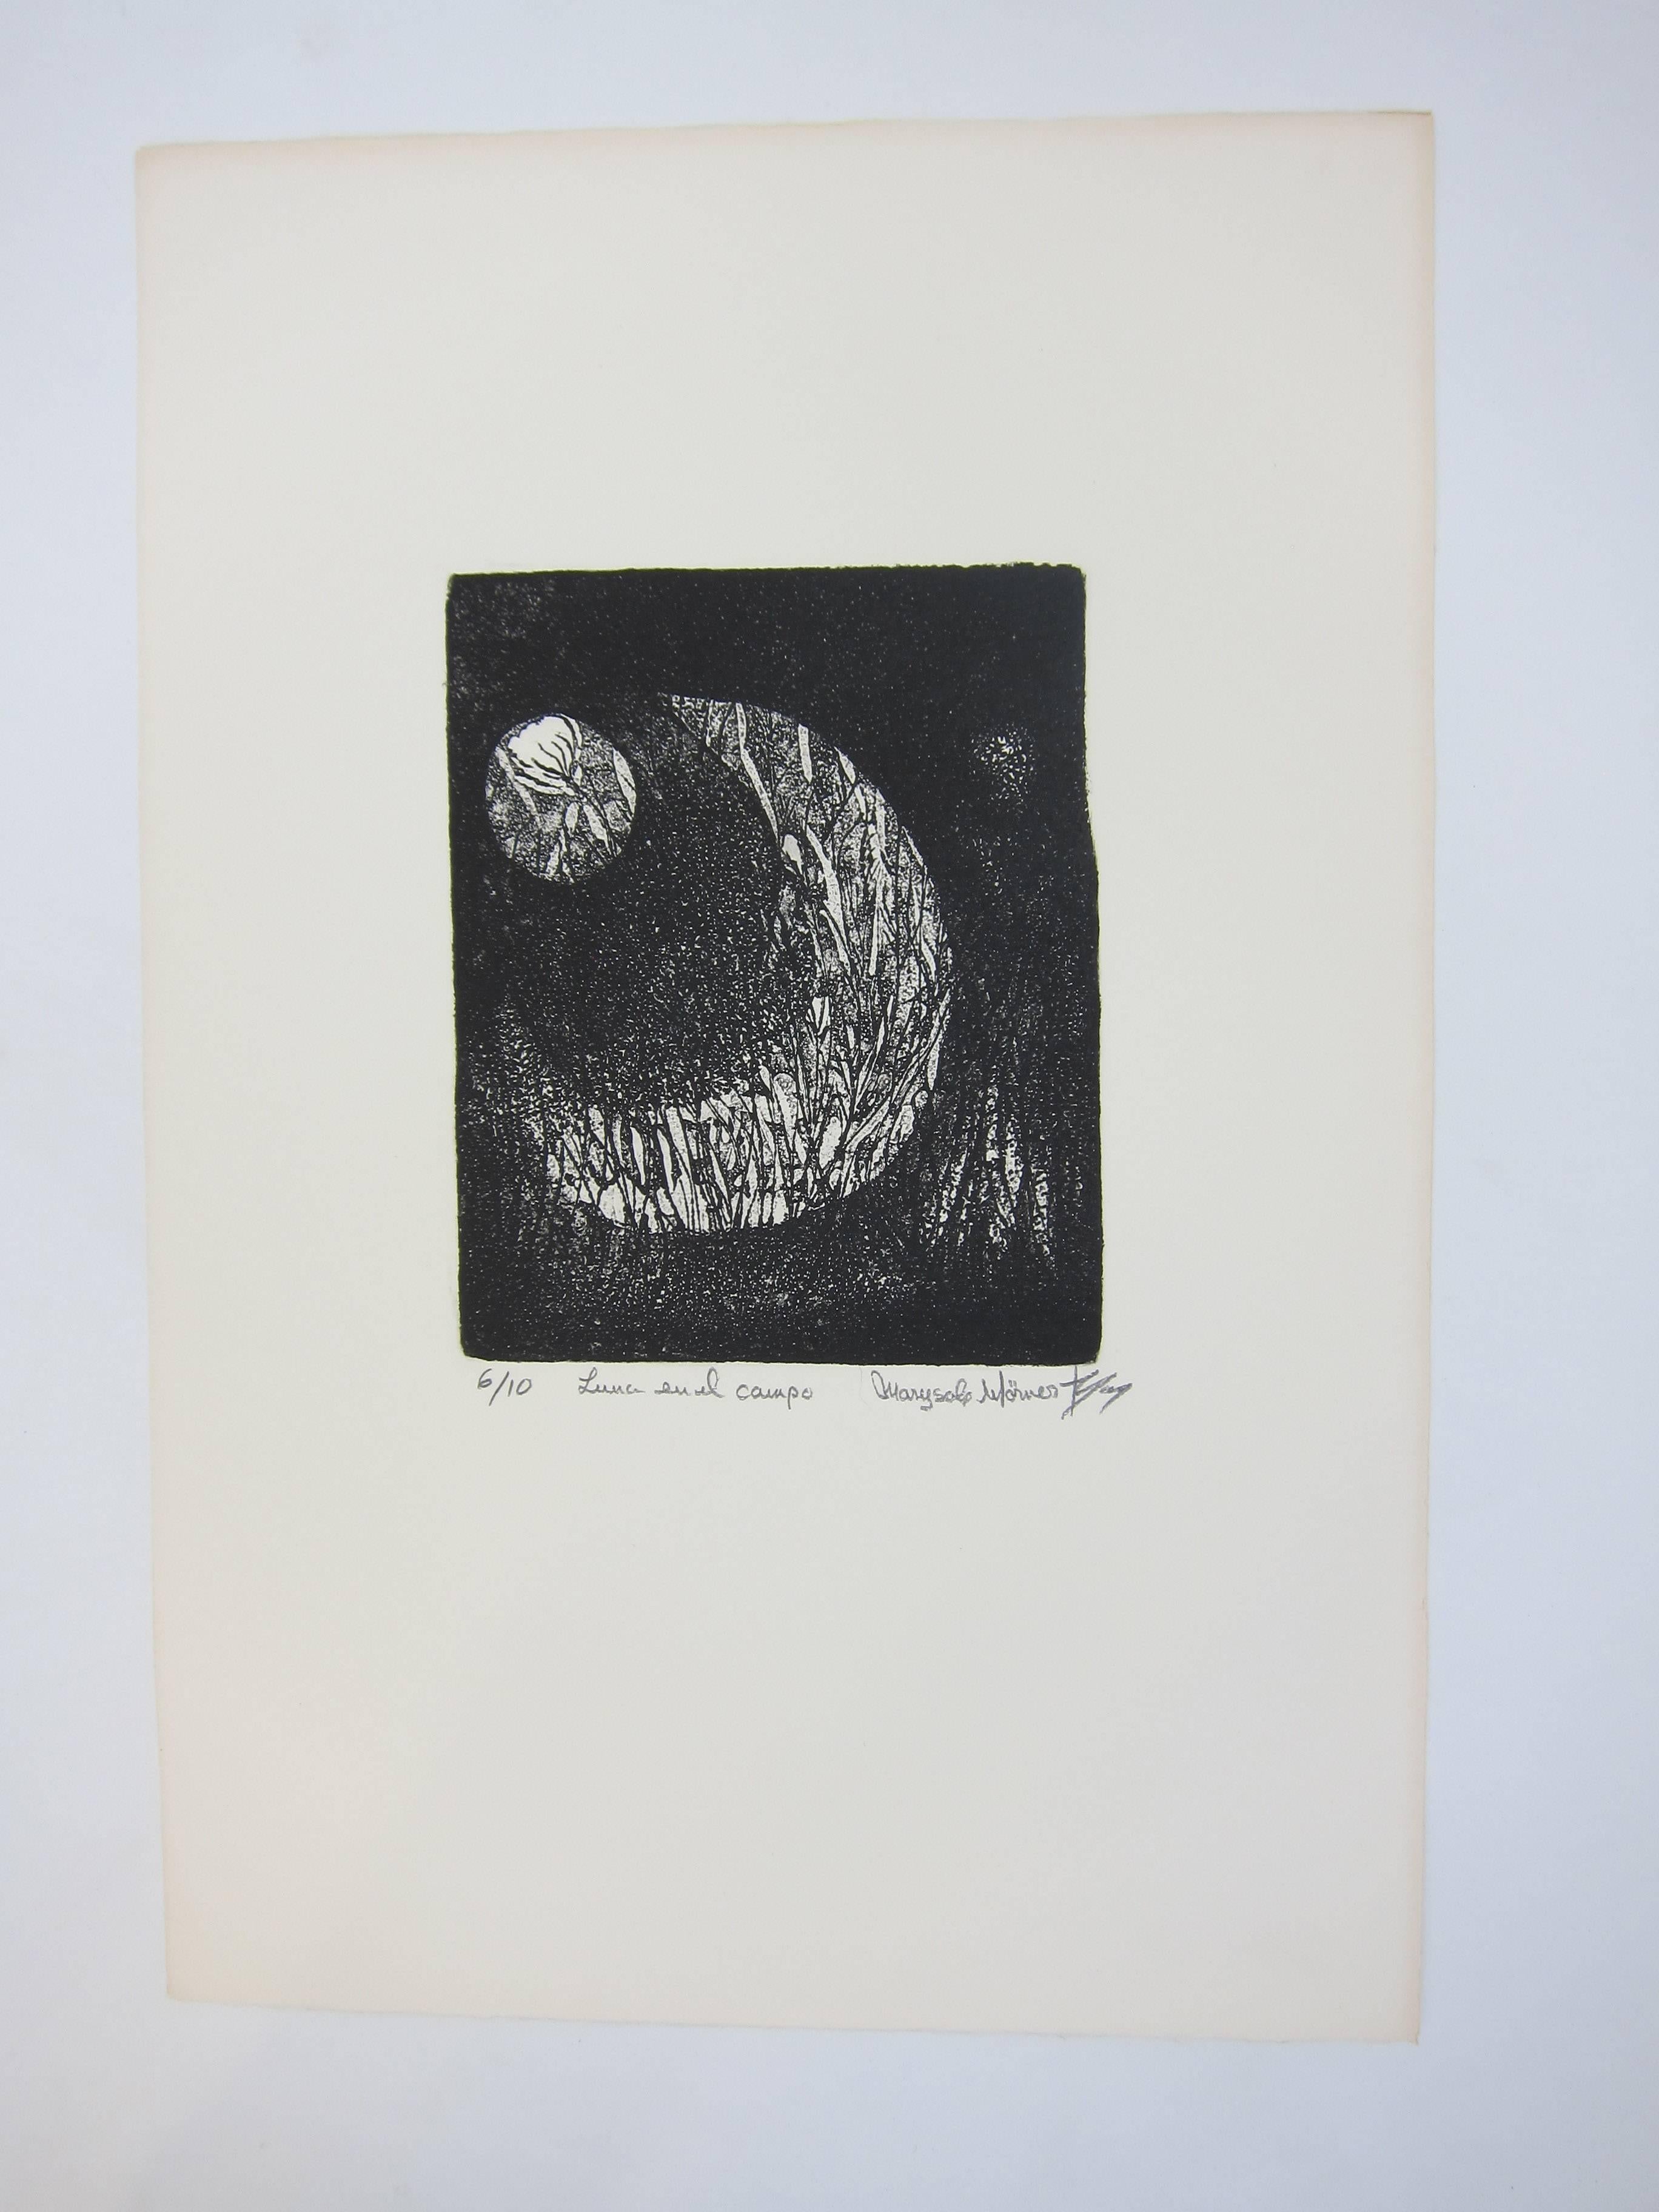 A special, extremely limited edition of ten engravings done between 1983-1985 by Marysole Worner Baz (Mexico City 1936 - Tepotzlan 2014). Worner Baz was an extraordinary talent who dominated different media (drawing, painting, sculpture, kinetic